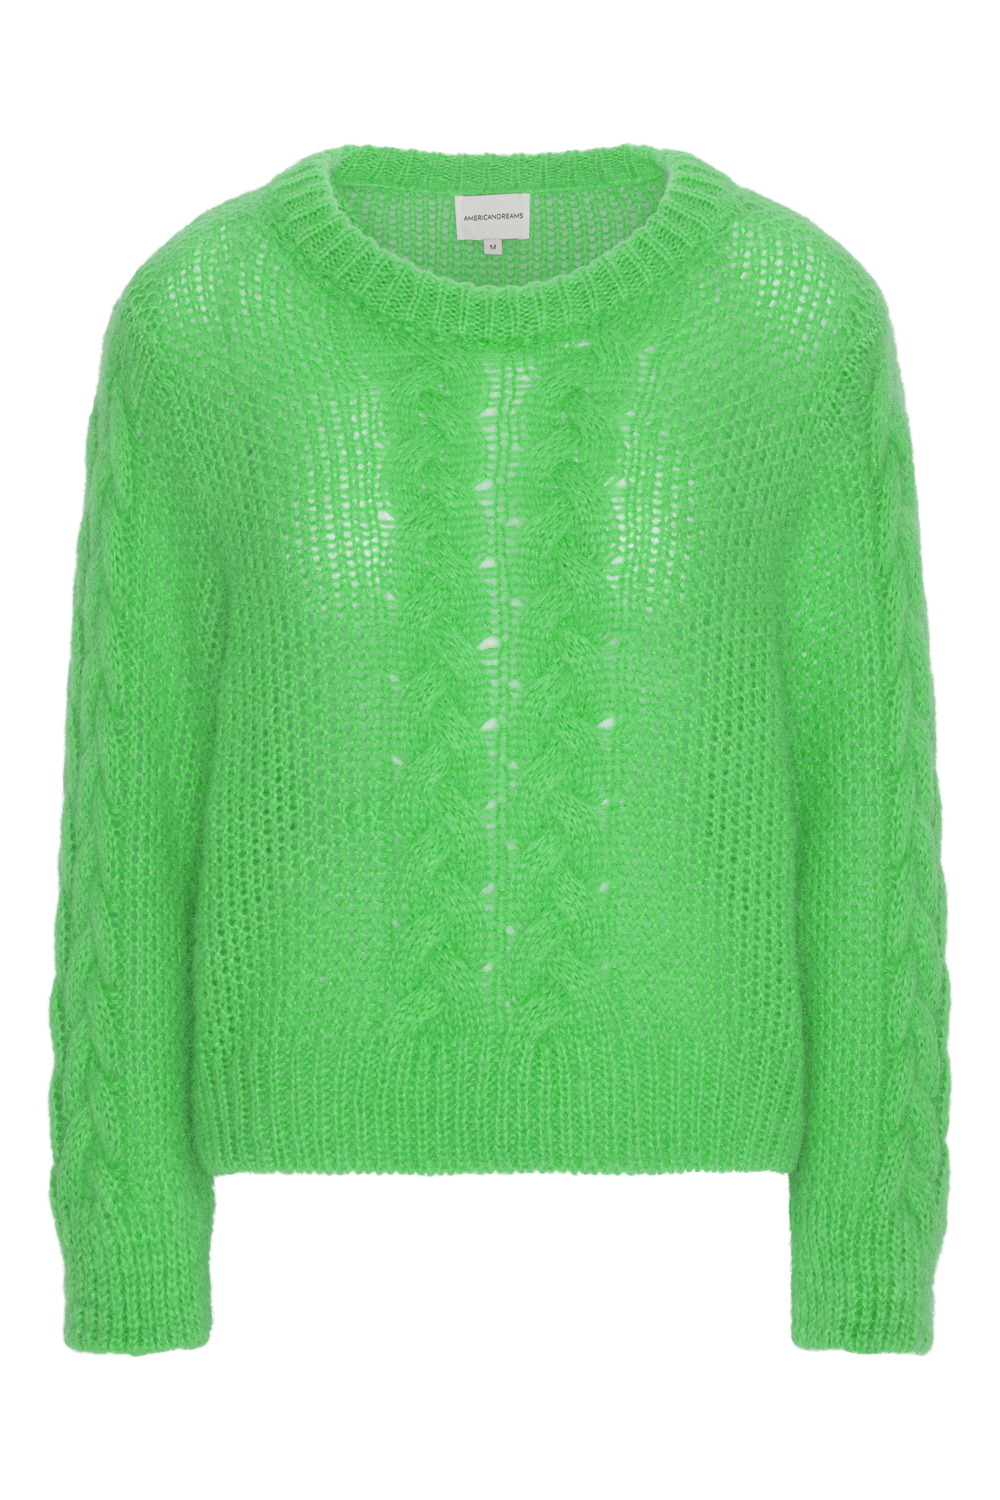 Louisa Cable Knit Pullover Emerald Green | Americandreams